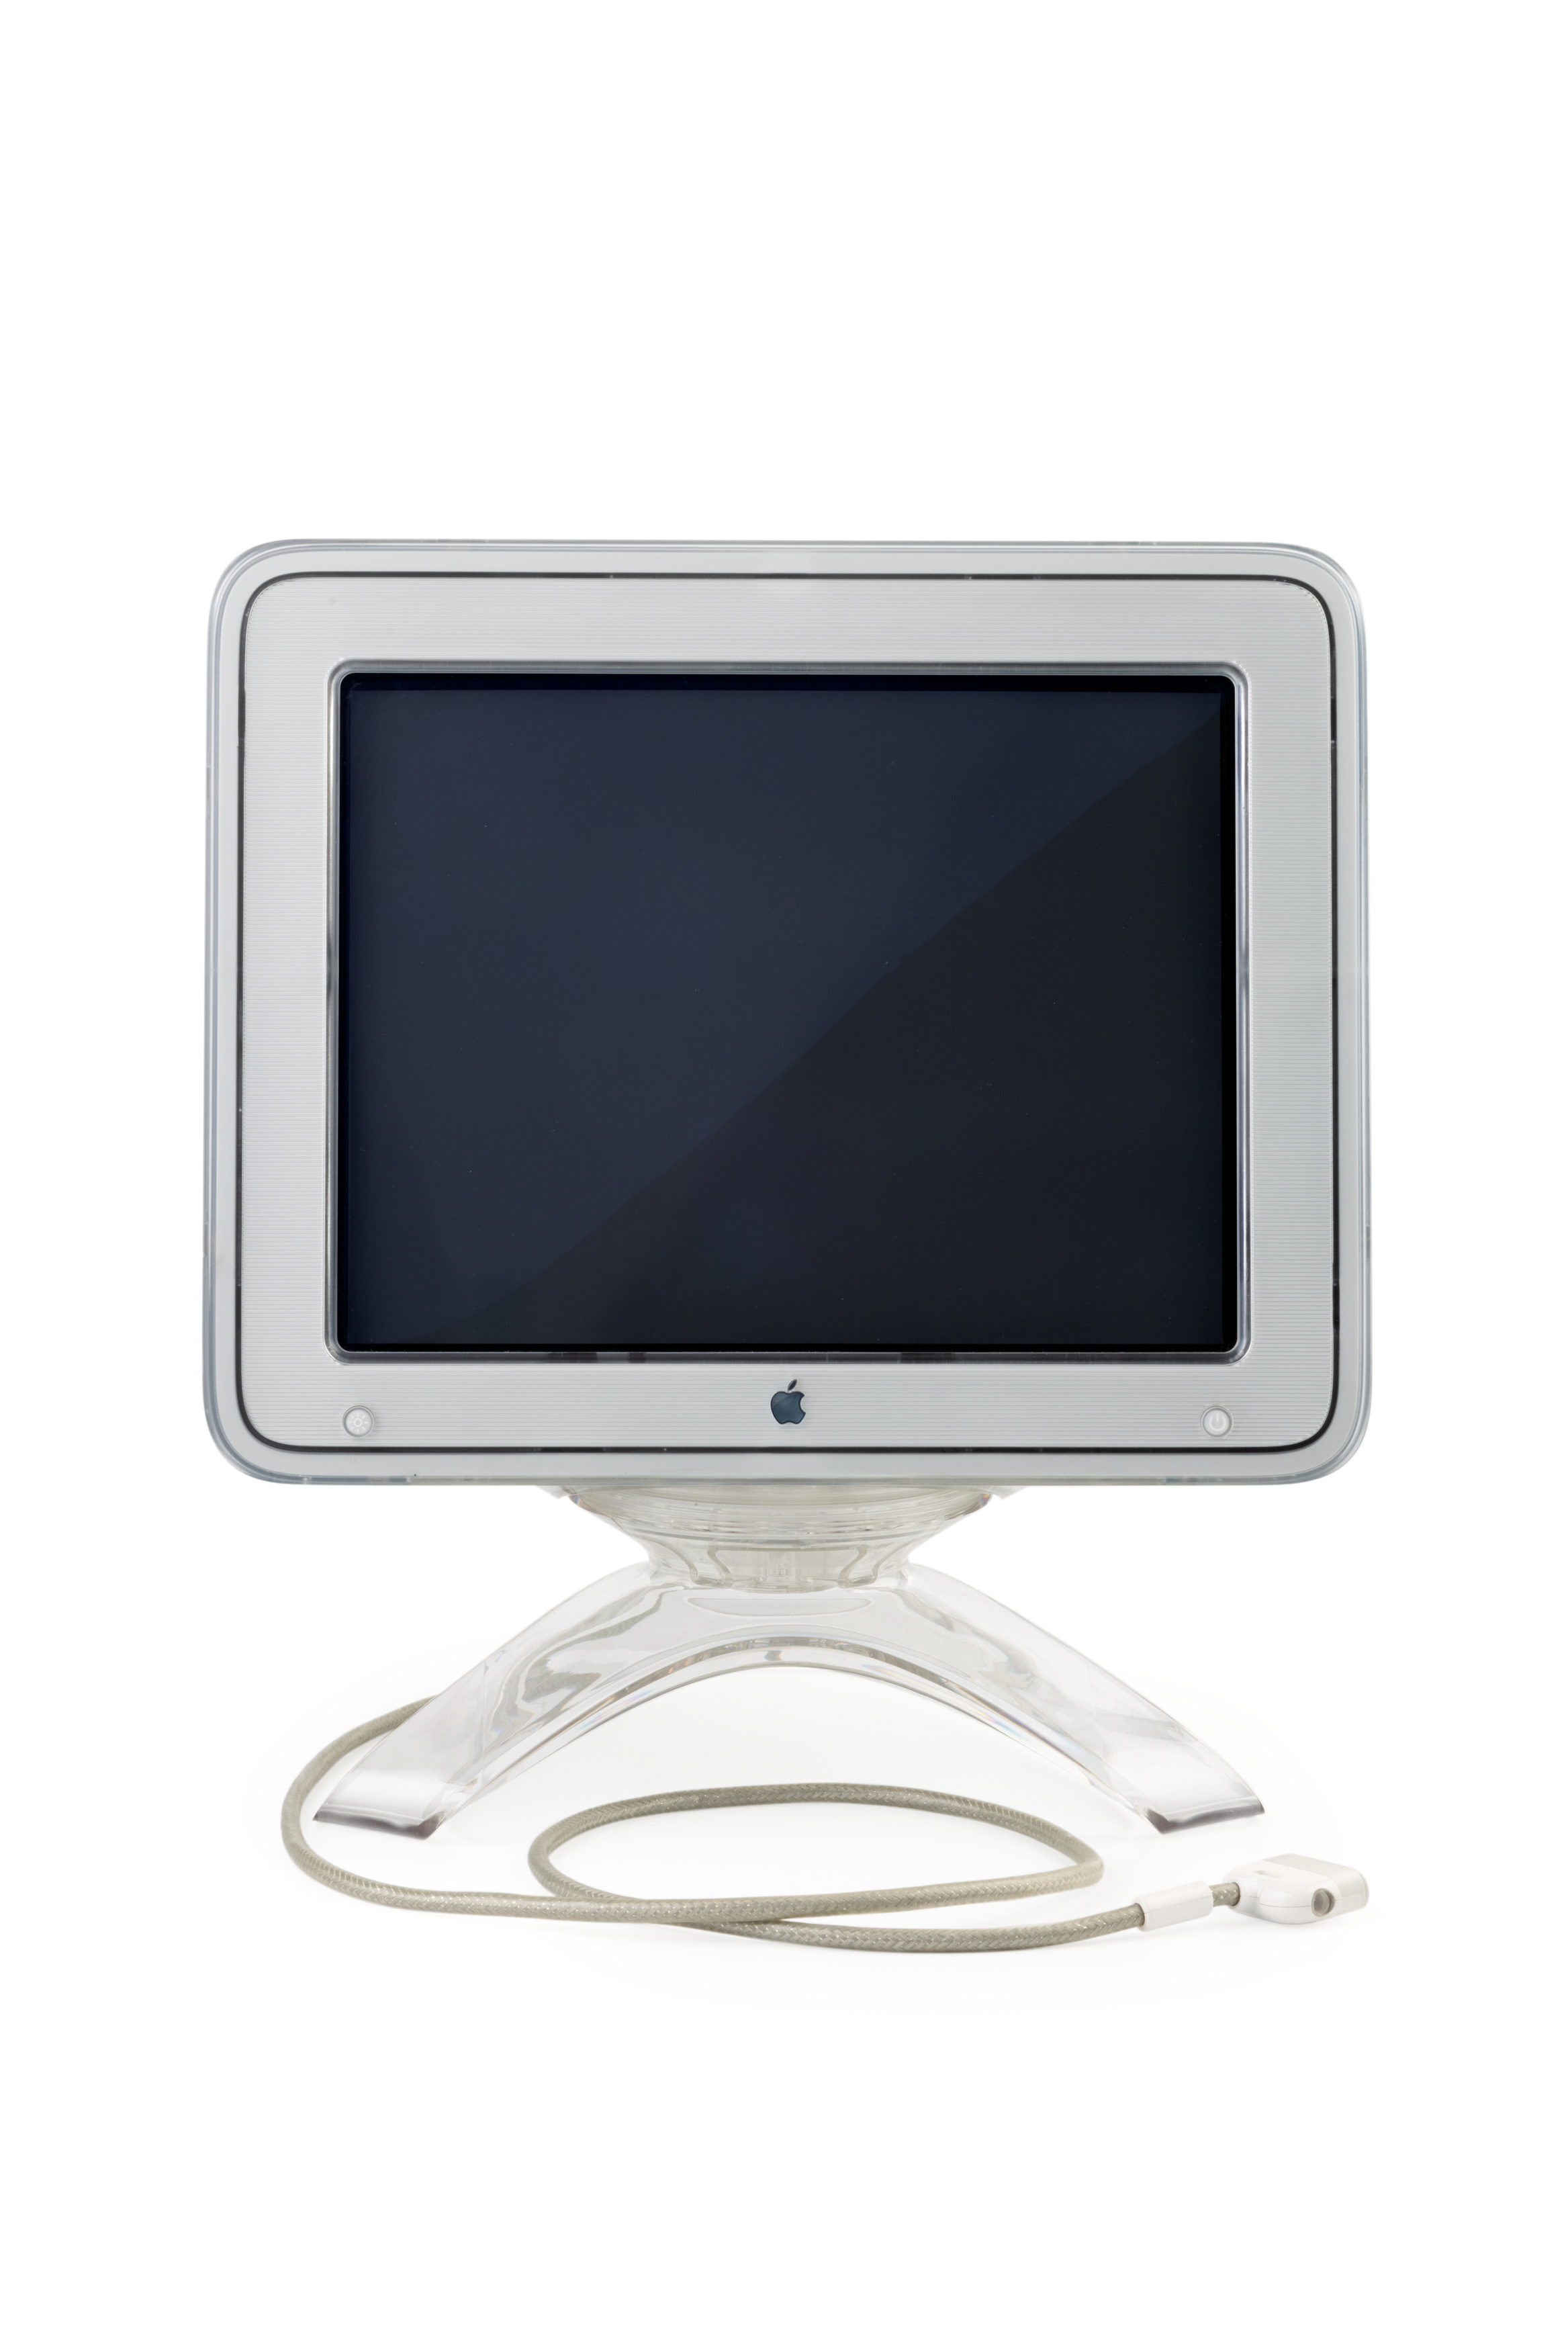 Apple 17" studio display for use with computer